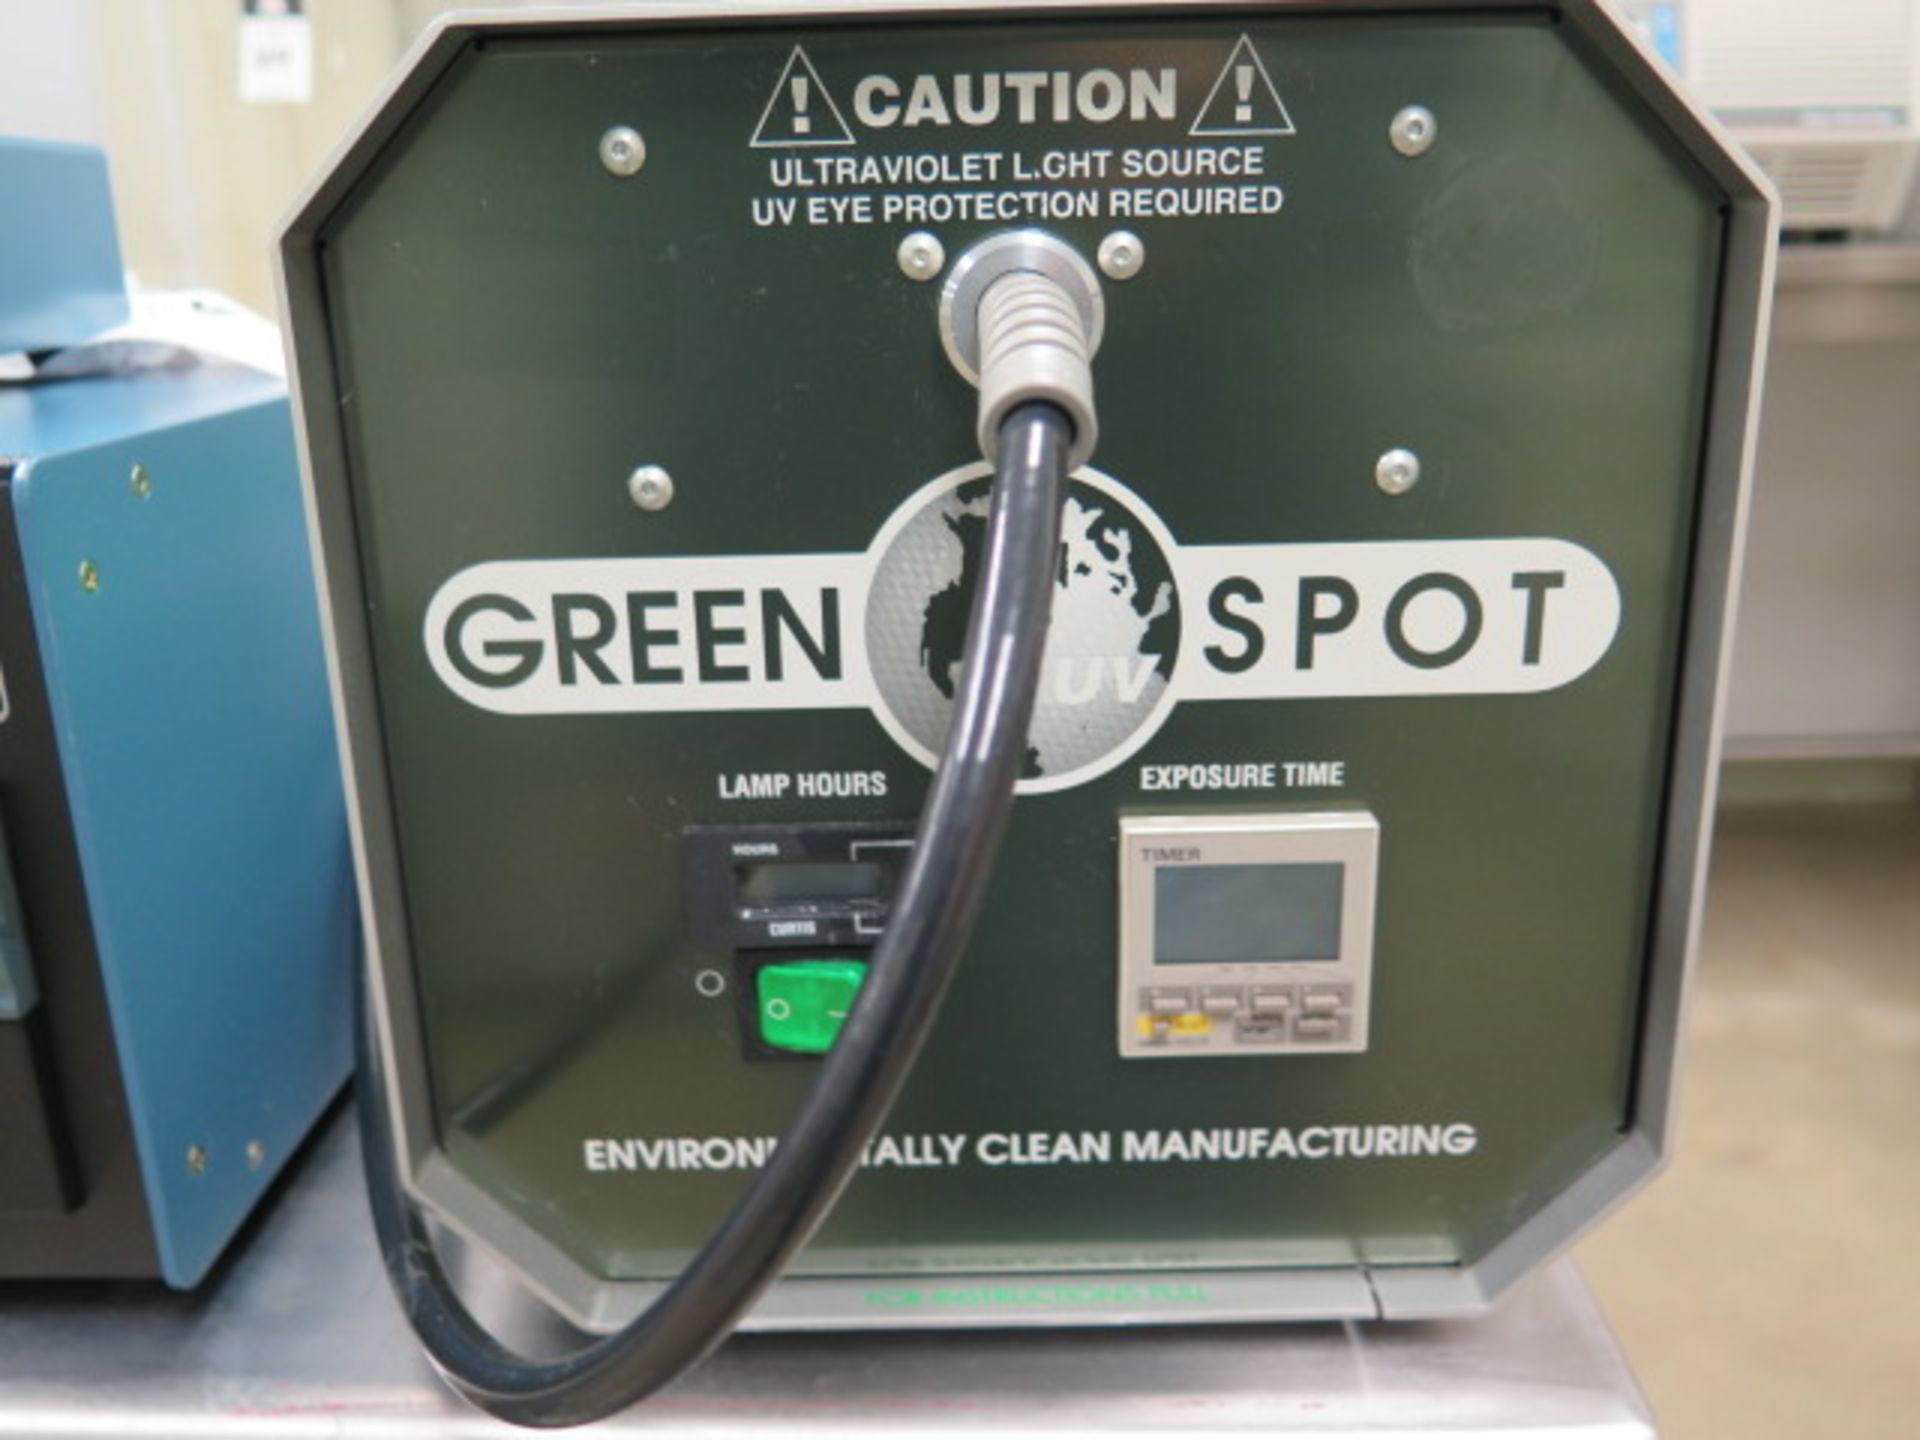 UV Source “Green Spot” mdl. 103 UV Spot Curing System (SOLD AS-IS - NO WARRANTY) - Image 4 of 10